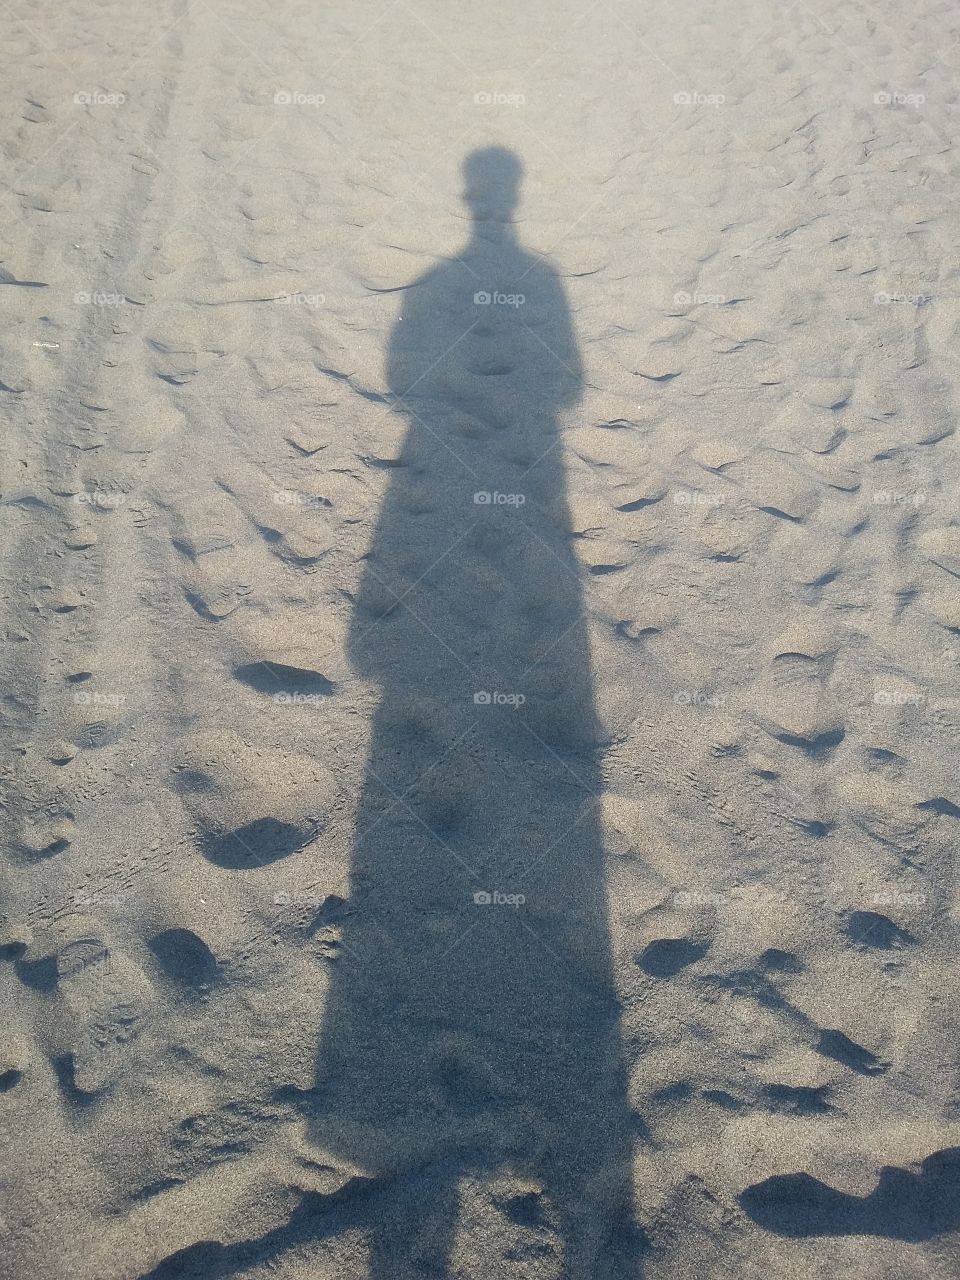 shadow people on the sand